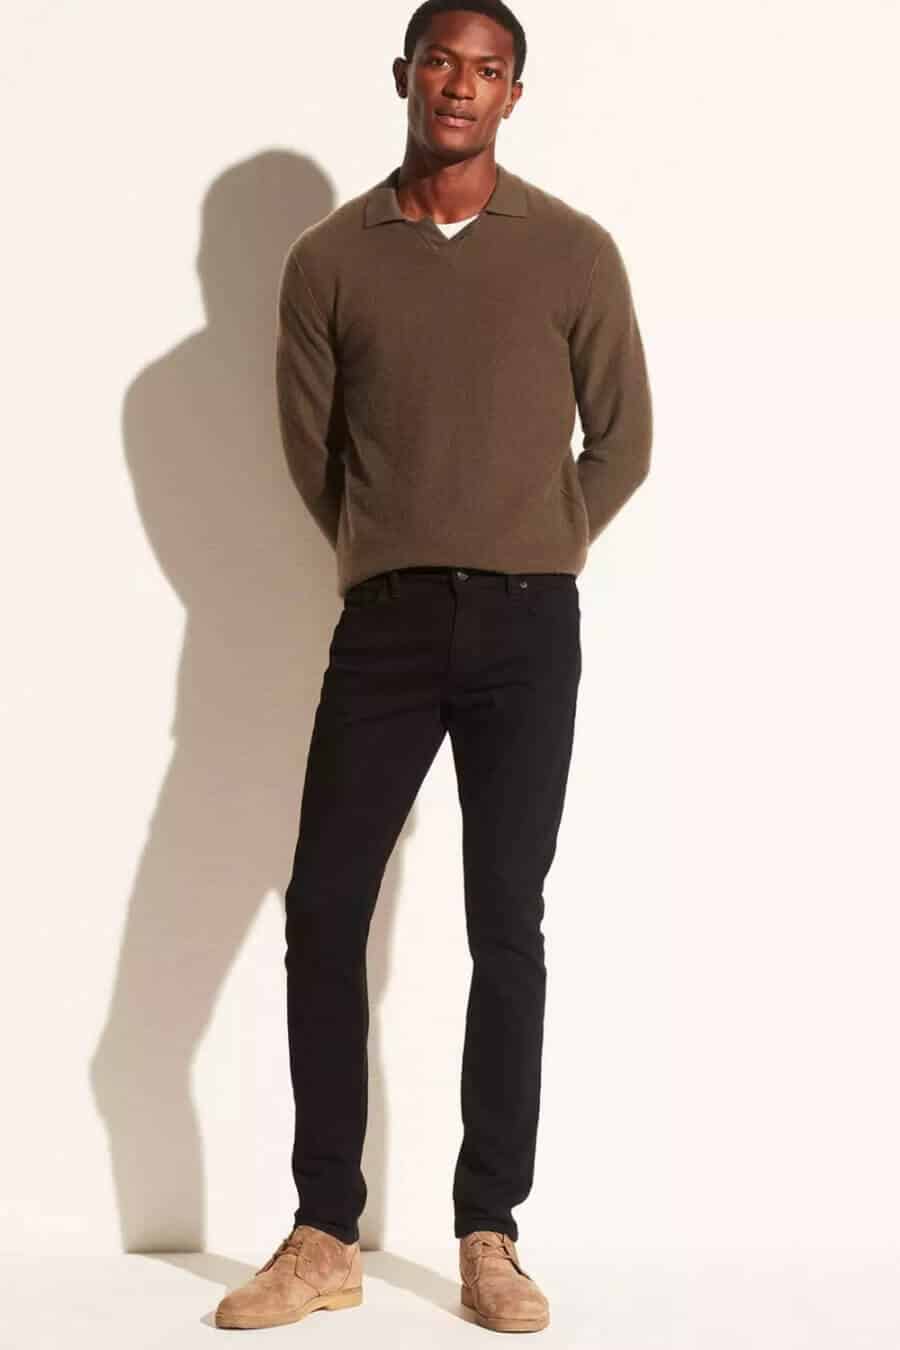 Men's black jeans and brown knitwear outfit